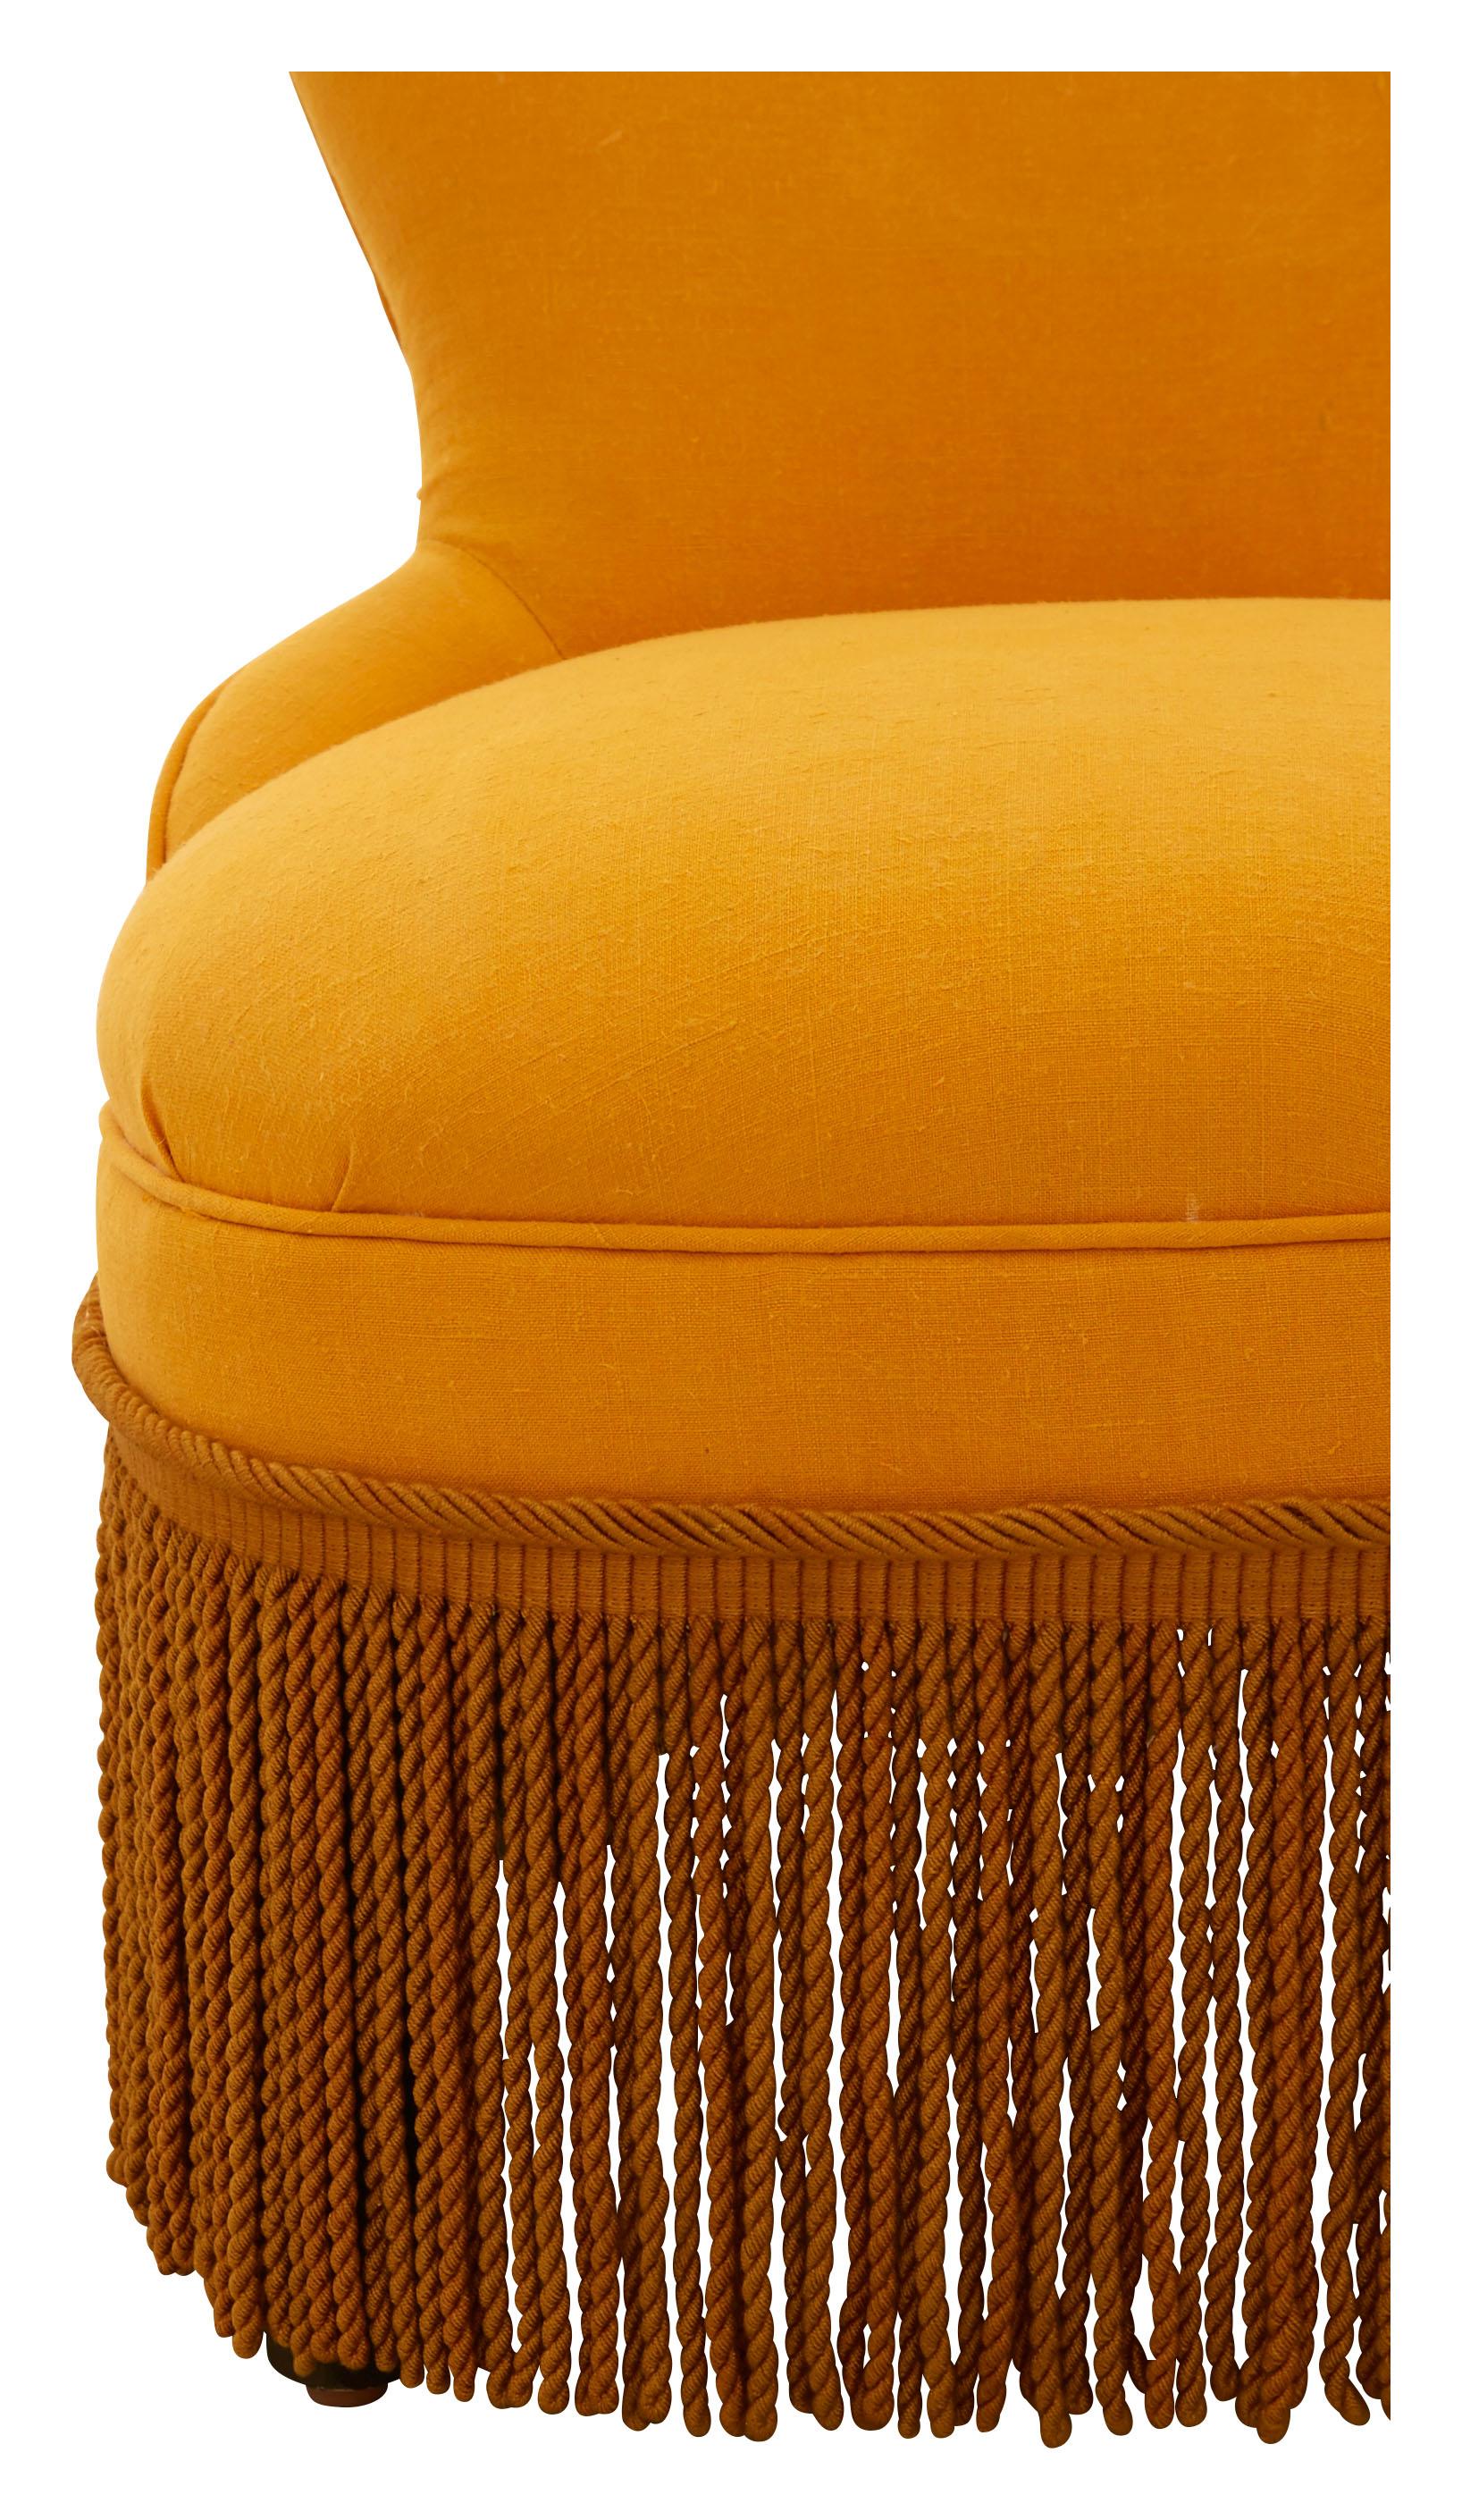 Late 19th Century Fringed Yellow Slipper Chair 1